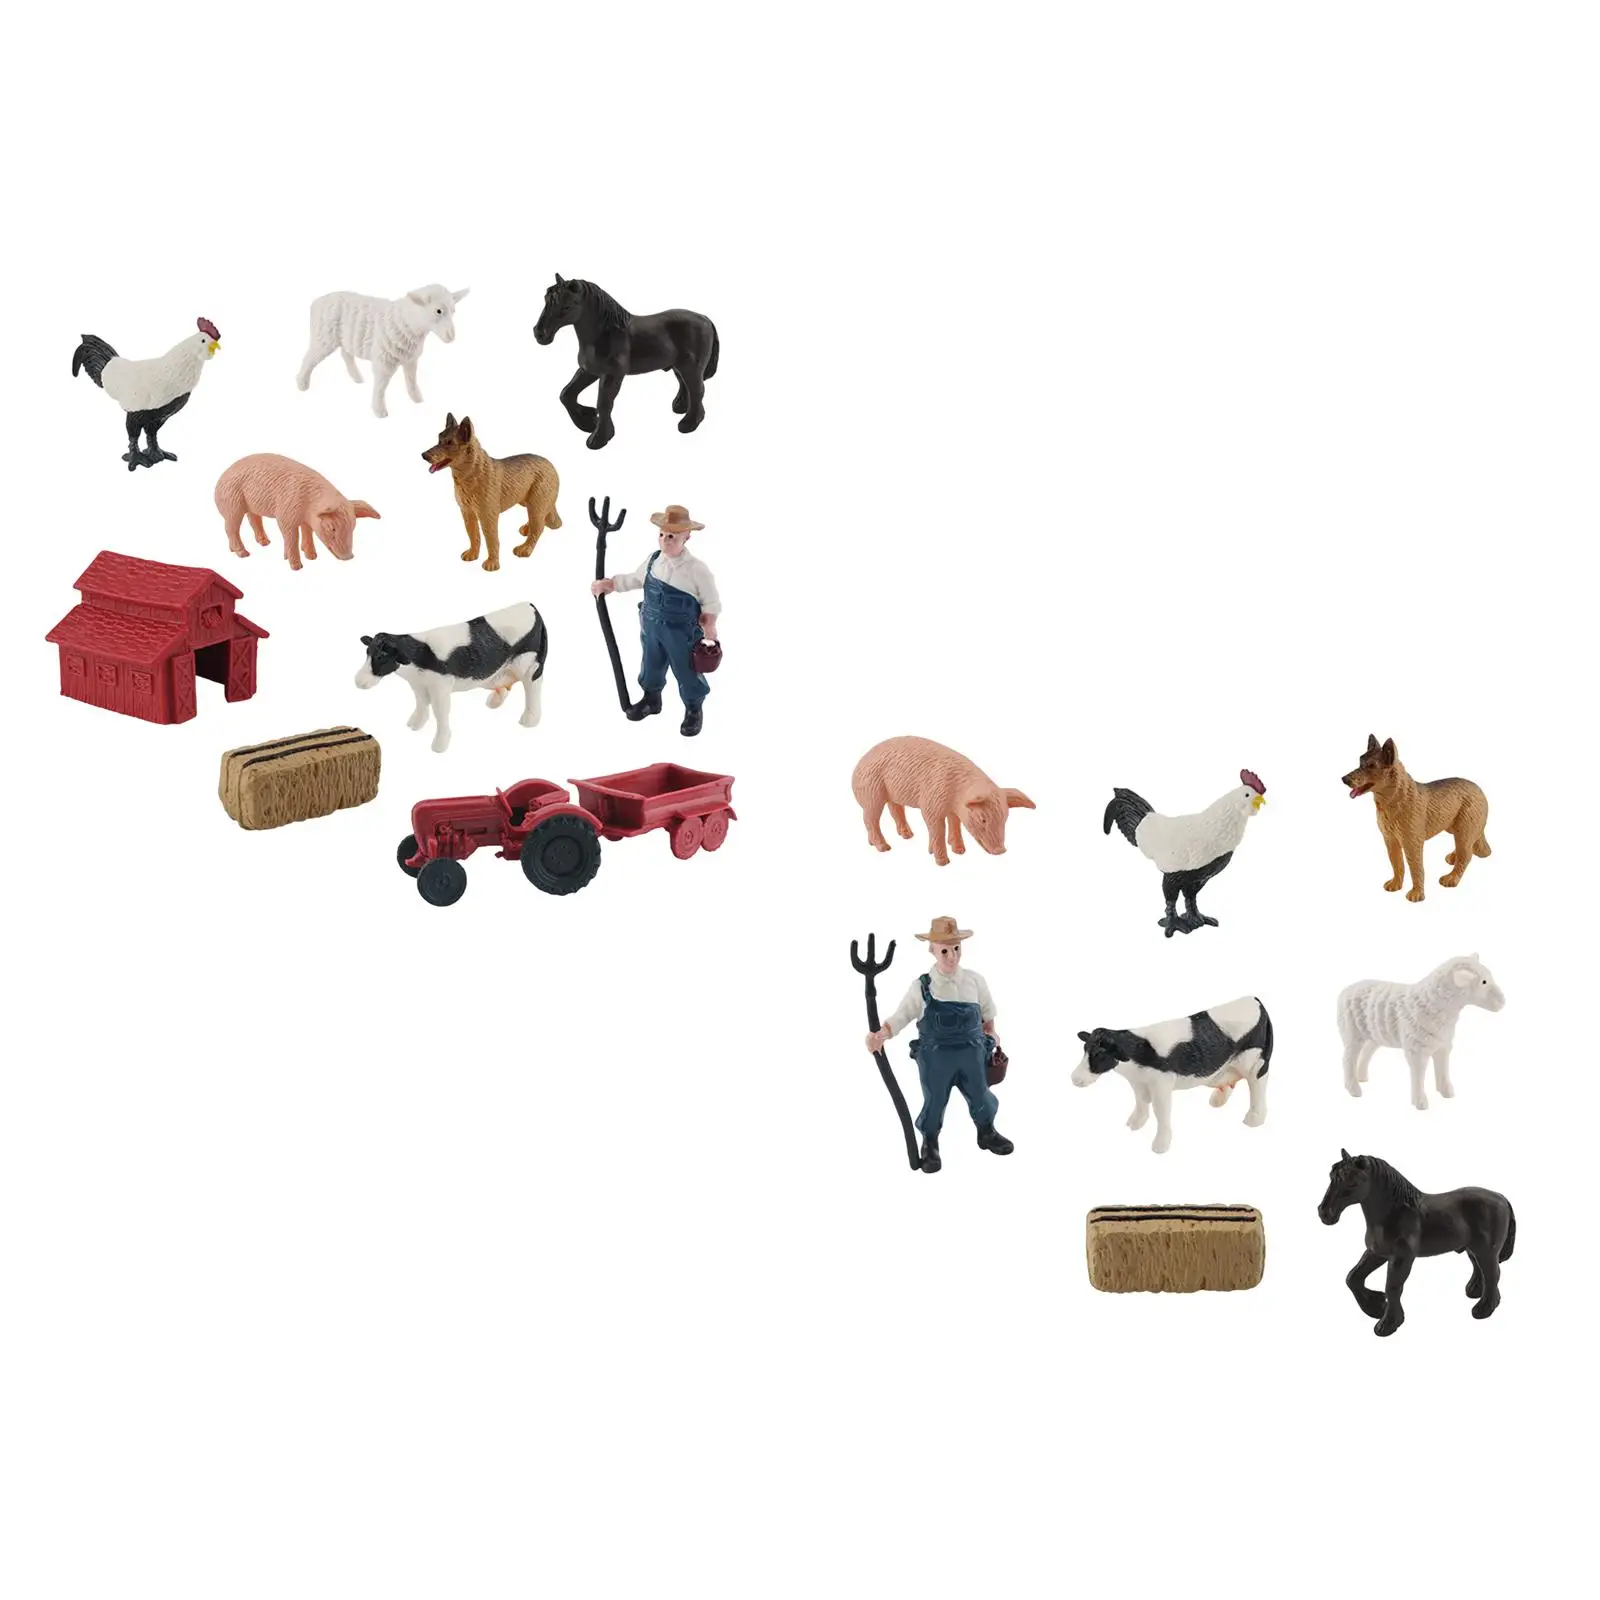 Lifelike Farm Animals Toys Farm Figurines Playset Small Poultry Toy Learning Educational Toys for Children Toddlers Boys Girls